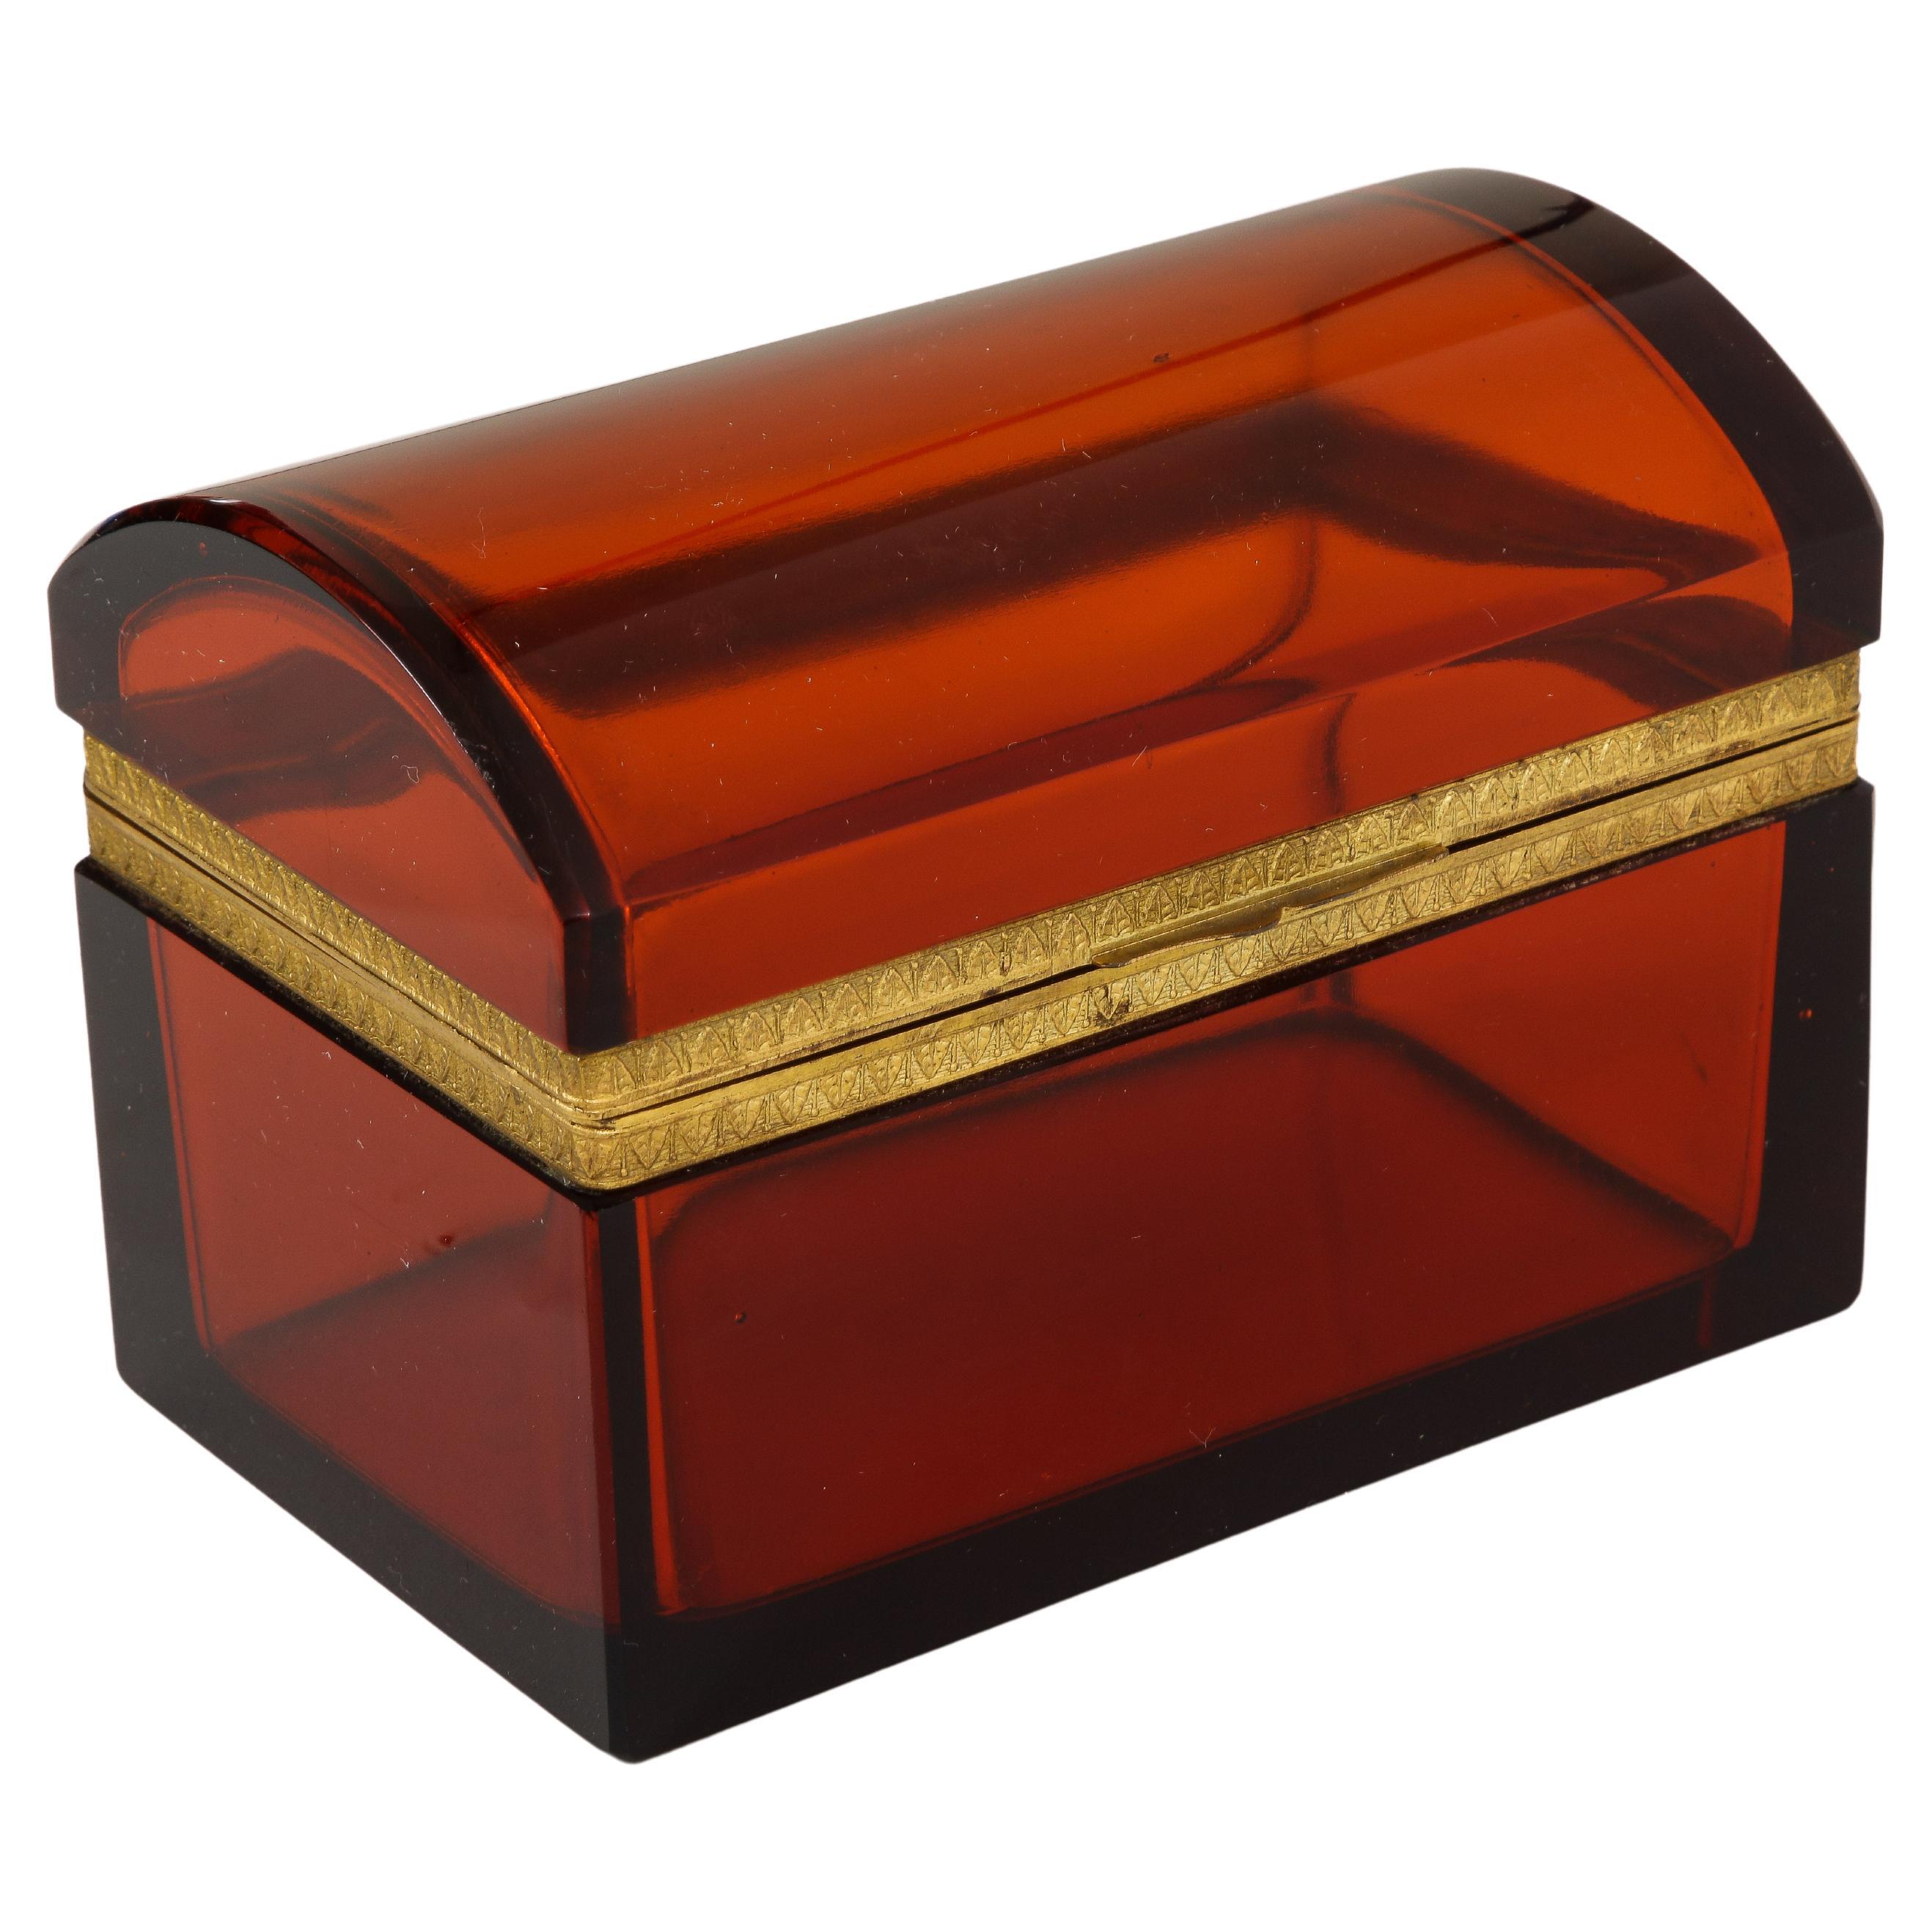 An Unusual 19th Century French Dore Bronze Mounted Orange/Red Crystal Box For Sale